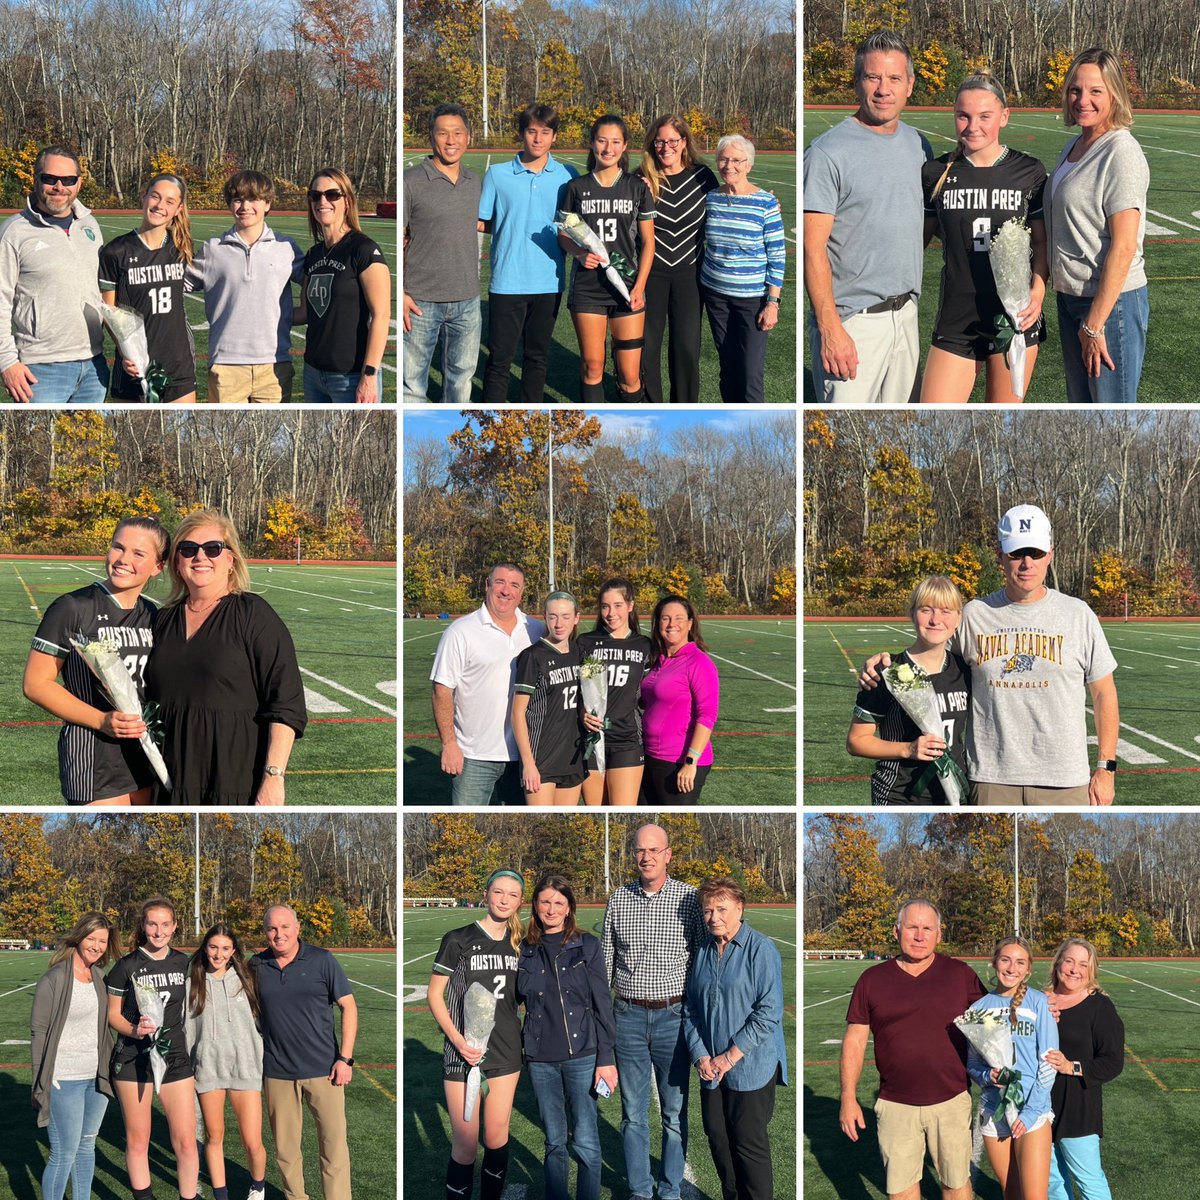 Thanks to our senior members of @AustinPrepGSoc for all their hard work and commitment to @austinprep! A special SO to their families for the love and support over the years. #Unitas #WinningCulture